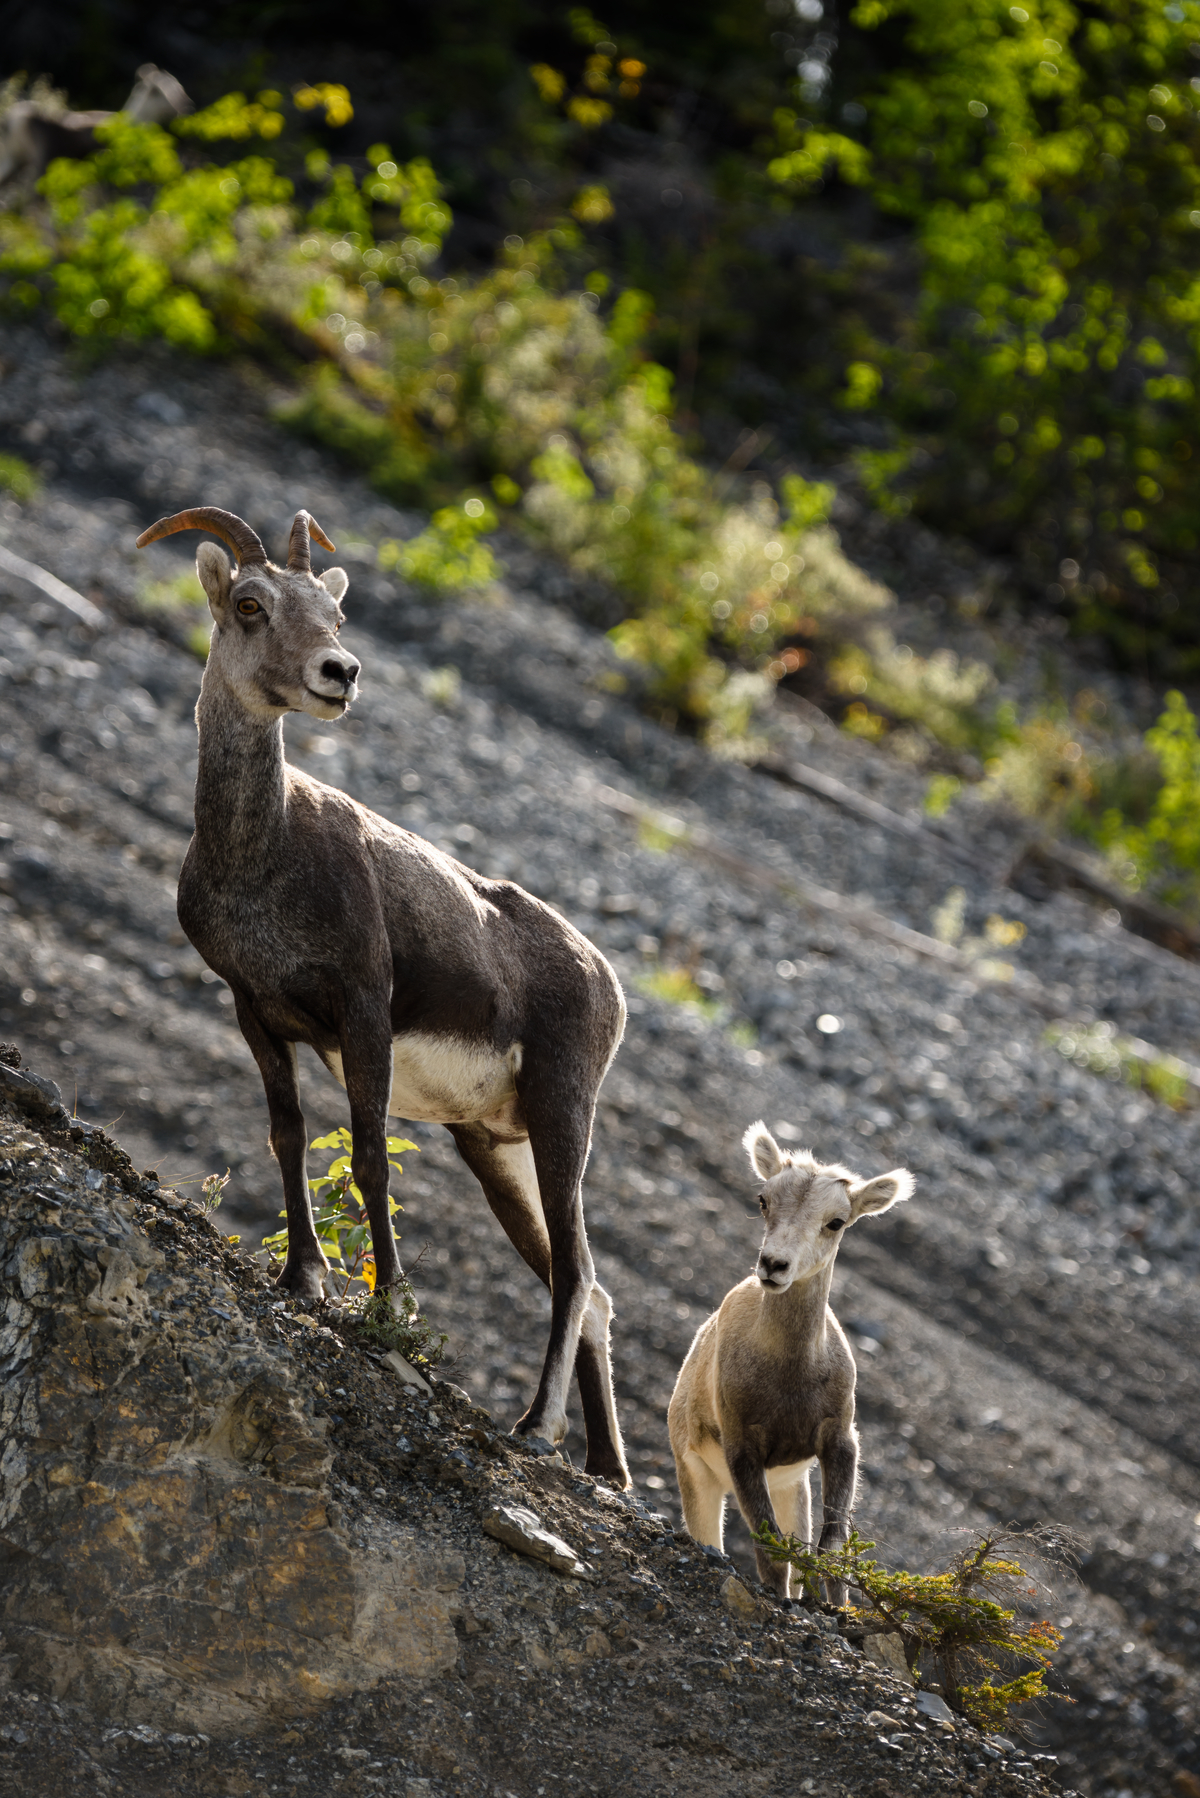 An adult sheep and a baby sheep walk along a rocky ledge.